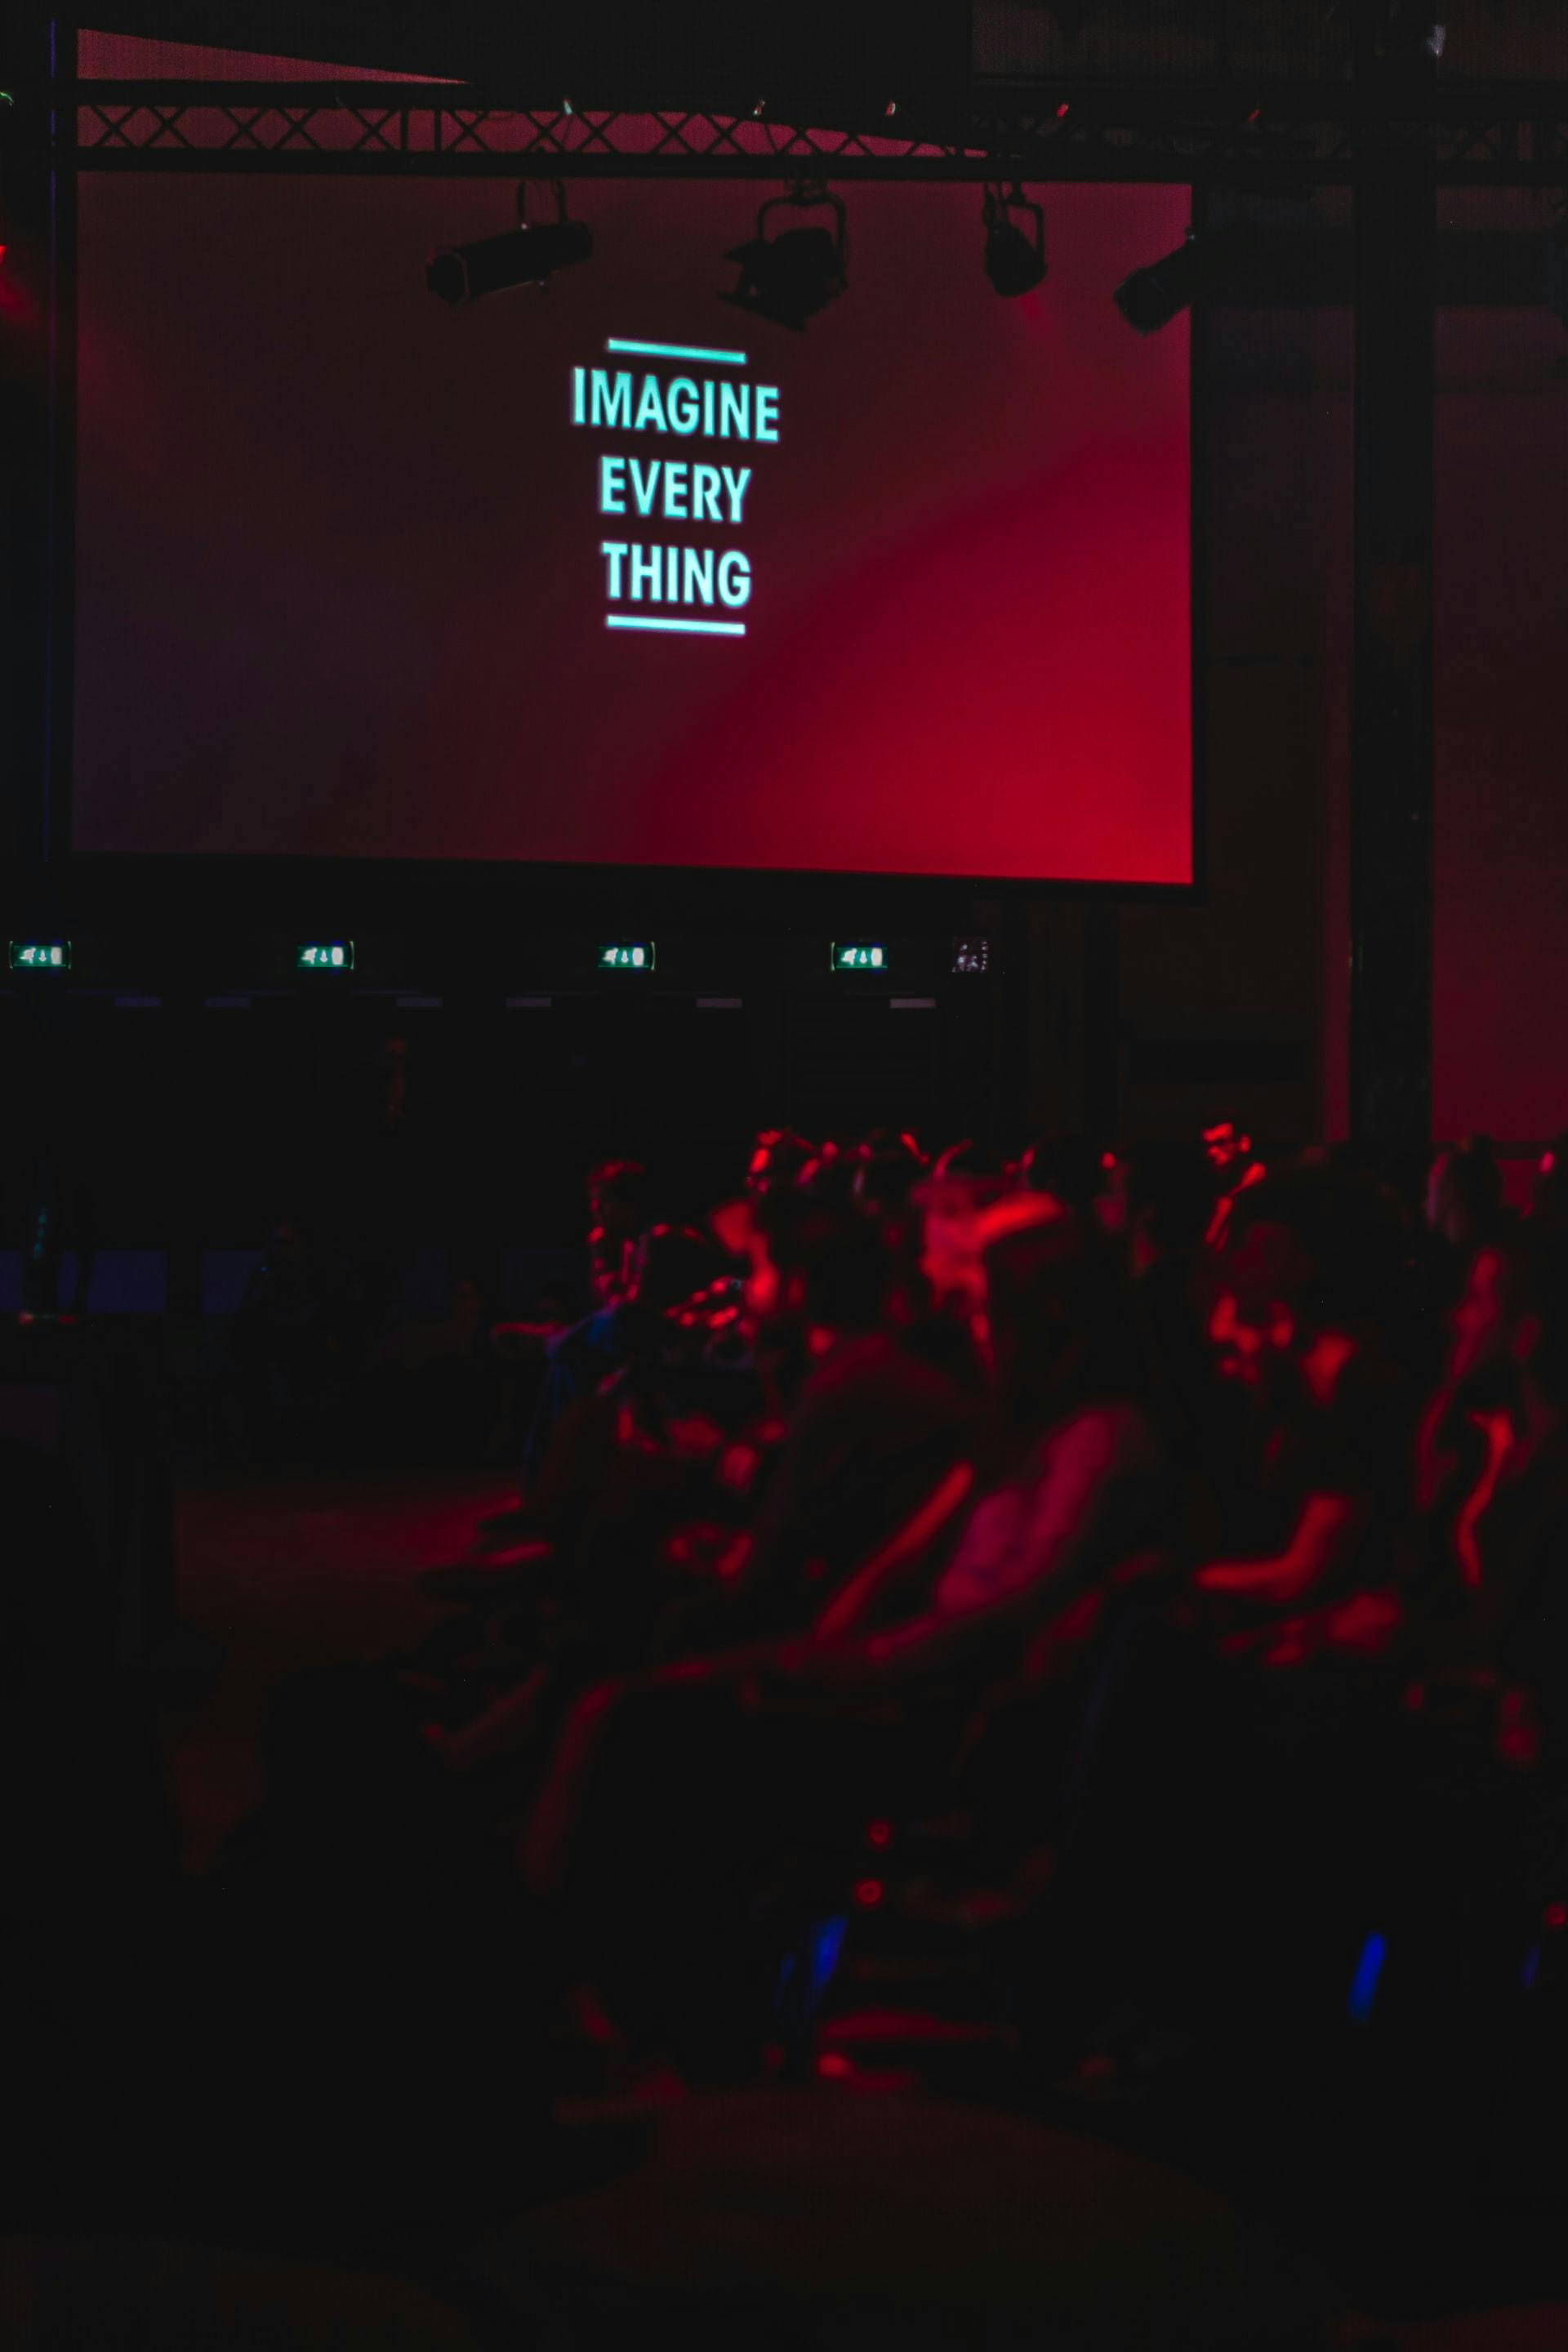 event with a room full of people with a screen with text "Imagine every thing."